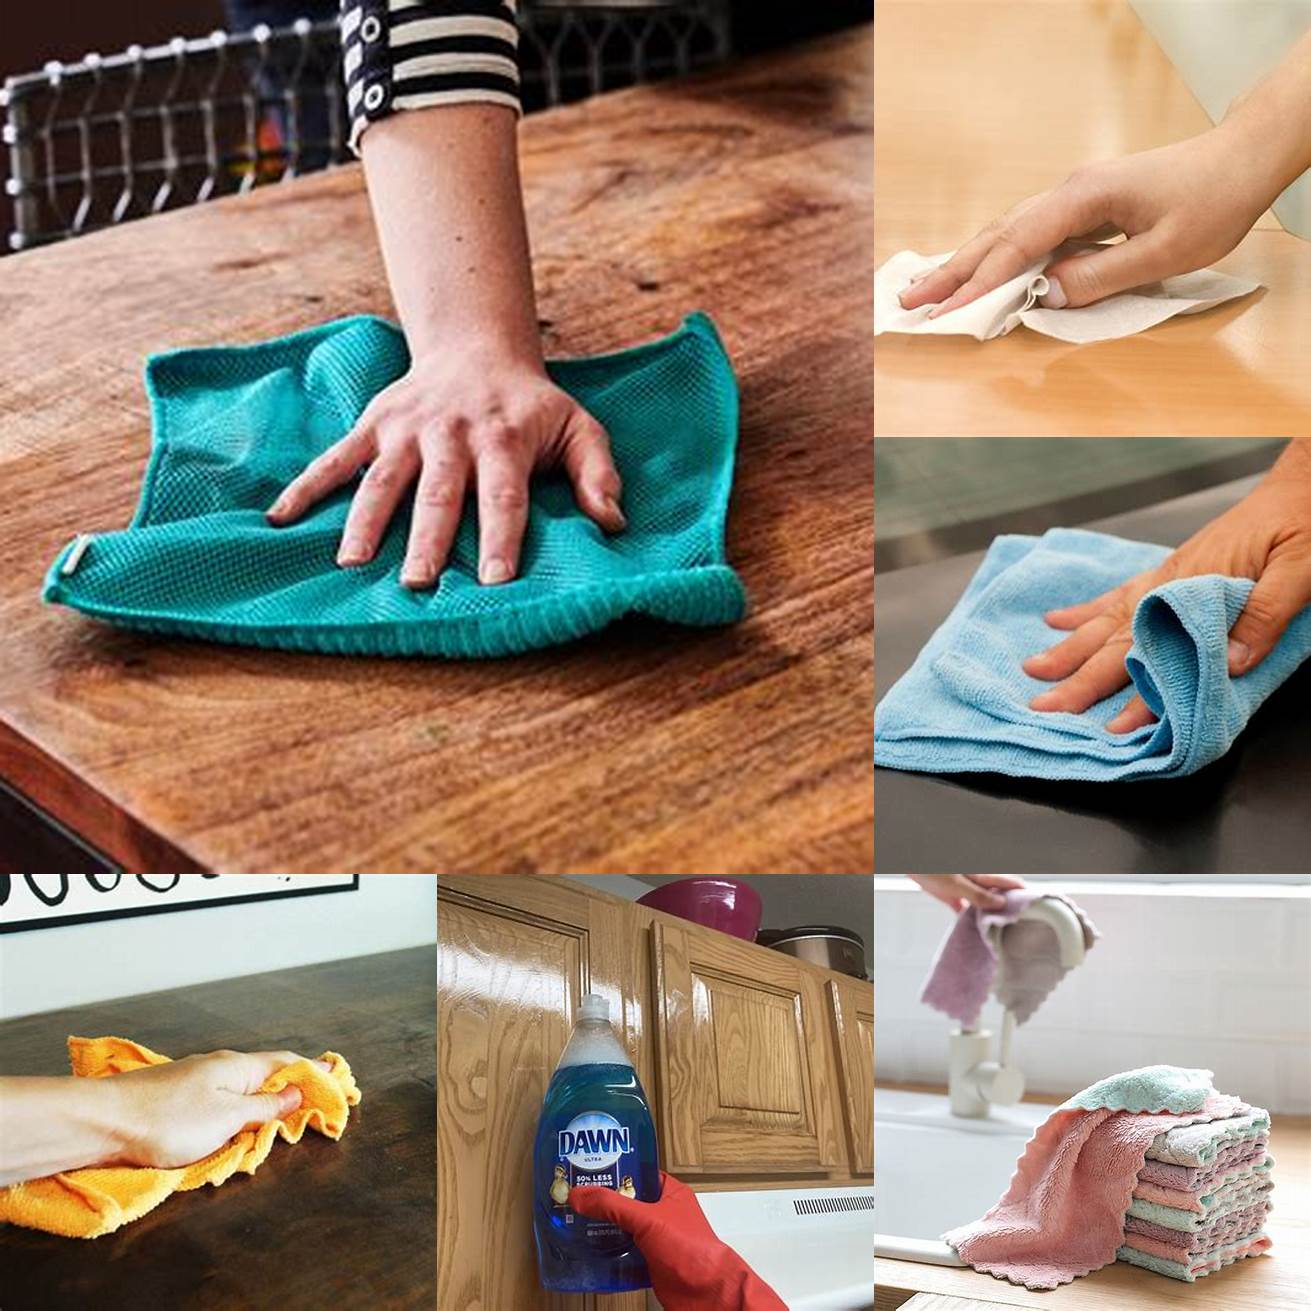 Wipe Down with a Soft Cloth and Mild Dish Soap